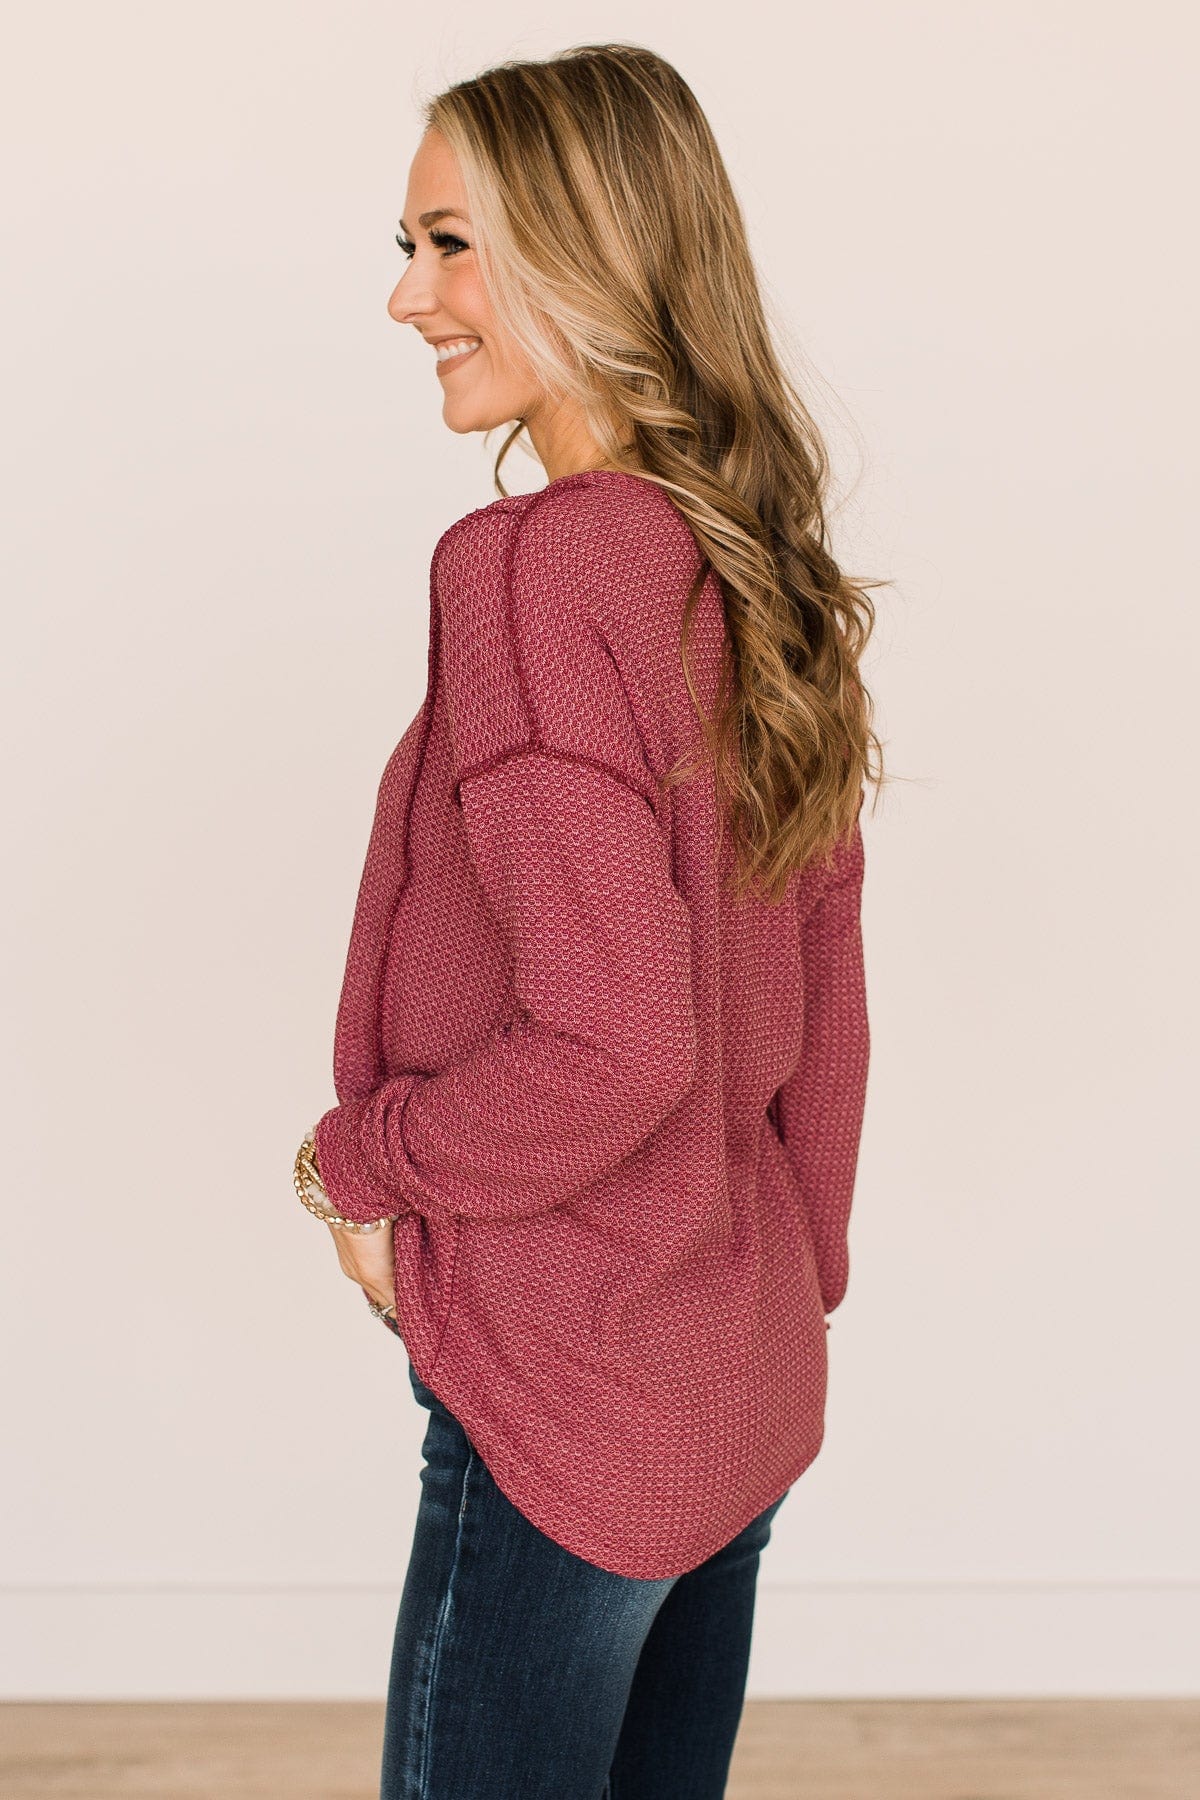 Yours To Hold Knit Top- Burgundy